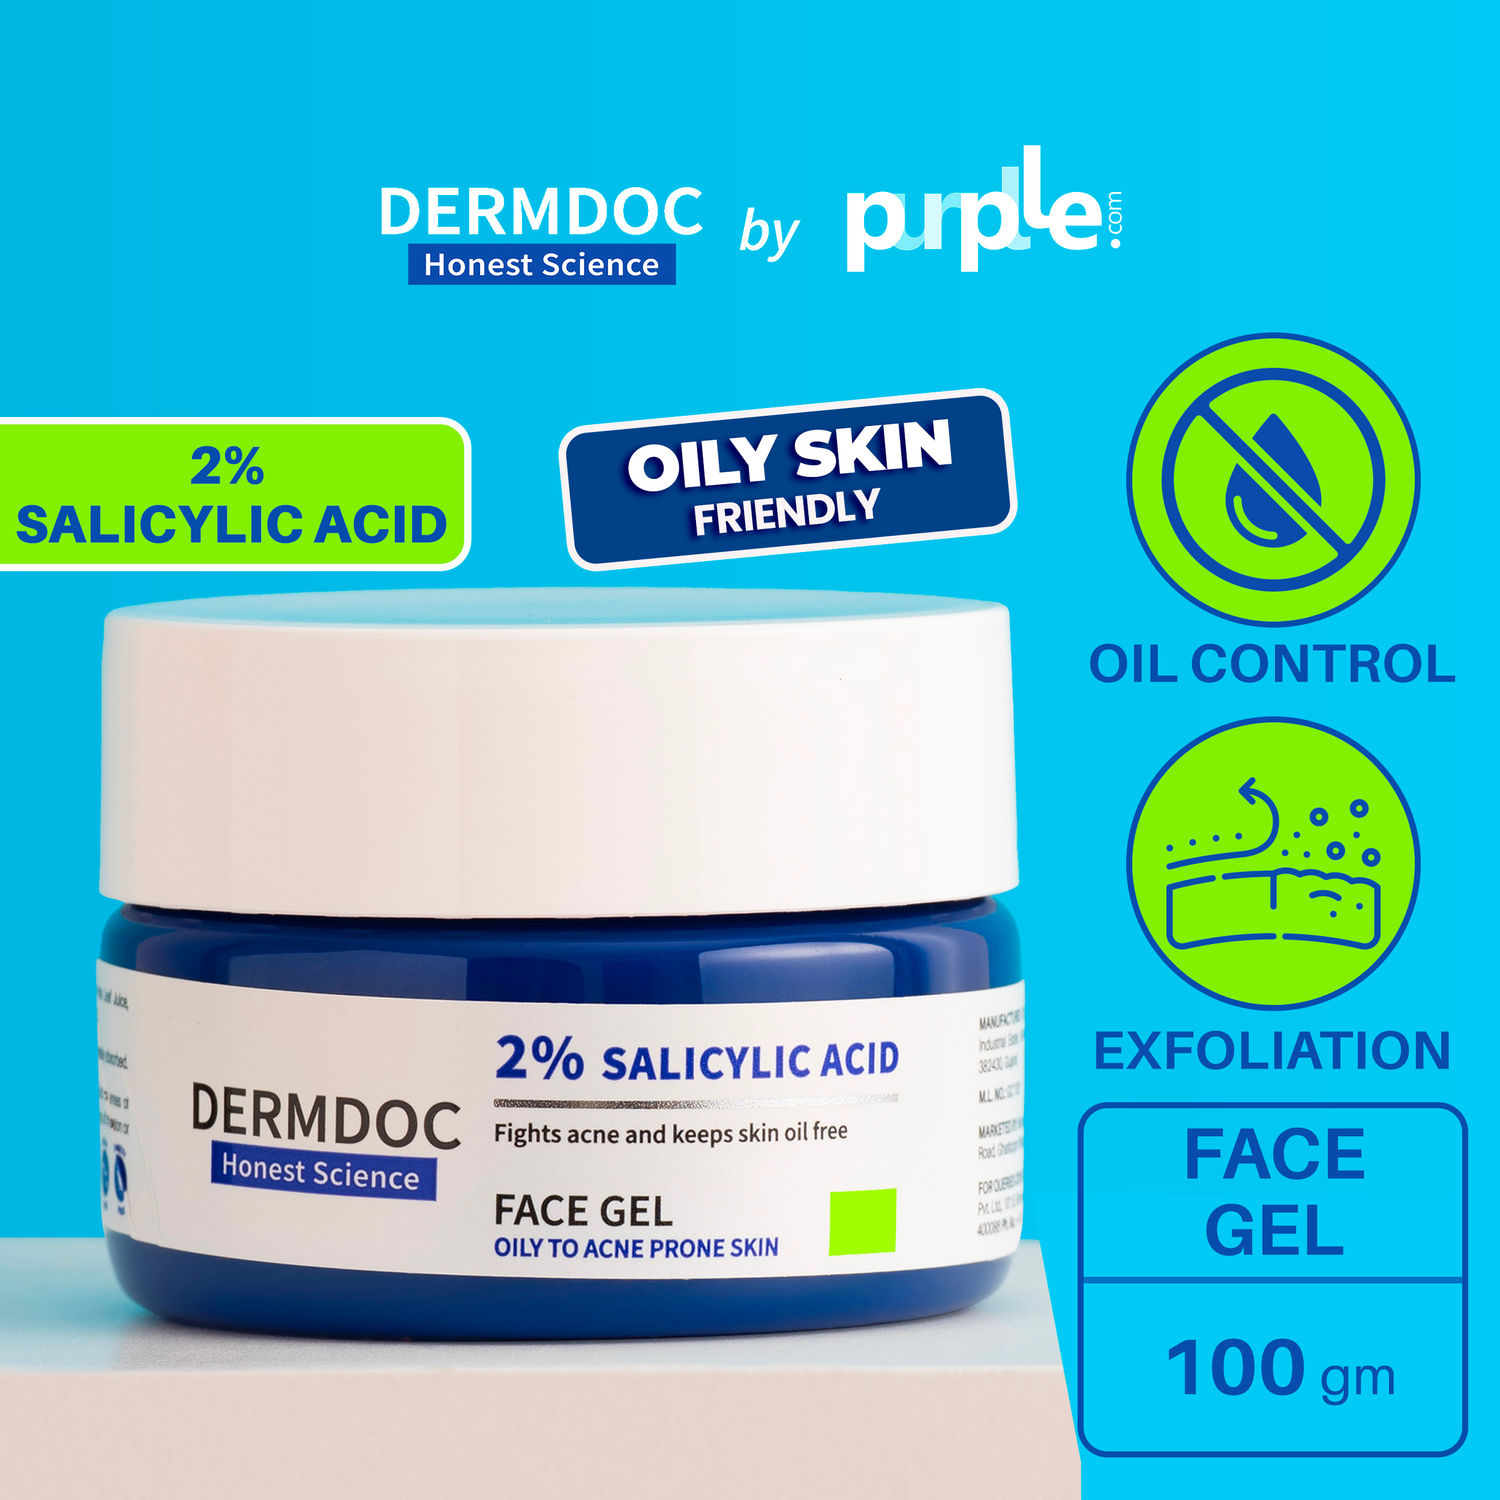 DermDoc 2% Salicylic Acid Anti Acne Face Gel (100 g) |For Oily and Acne  Prone Skin|Lightweight, Absorbs Quickly, Reduces Acne  Blackheads,  Regularizes Sebum Production, Evens Skin Texture|Paraben Free, Silicone Free,  Sulfate